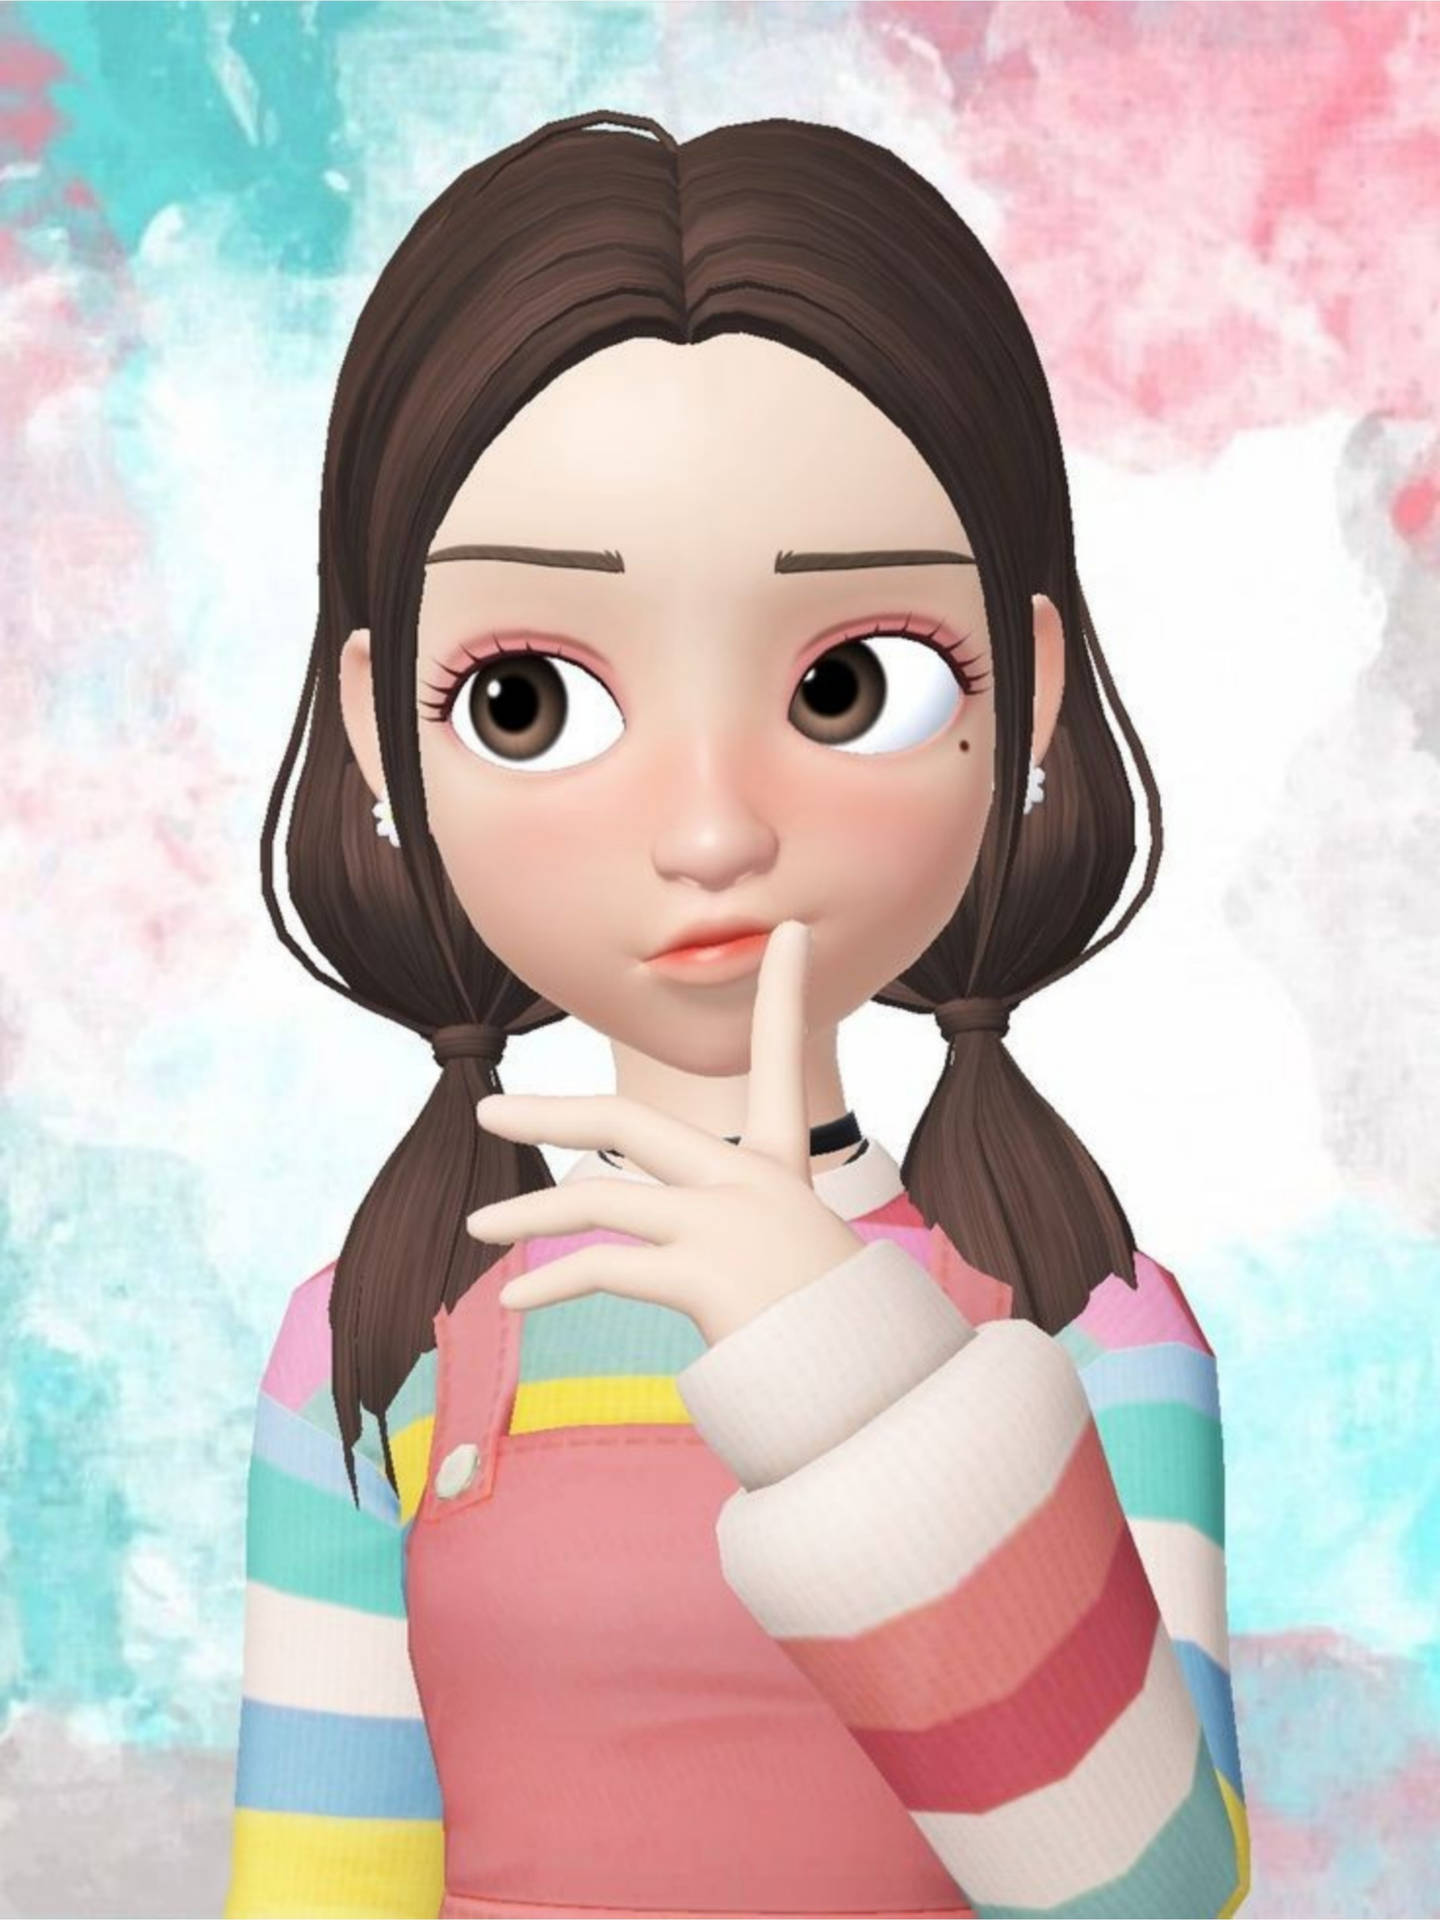 Zepeto Cute Girl With Rainbow Sweater Wallpaper